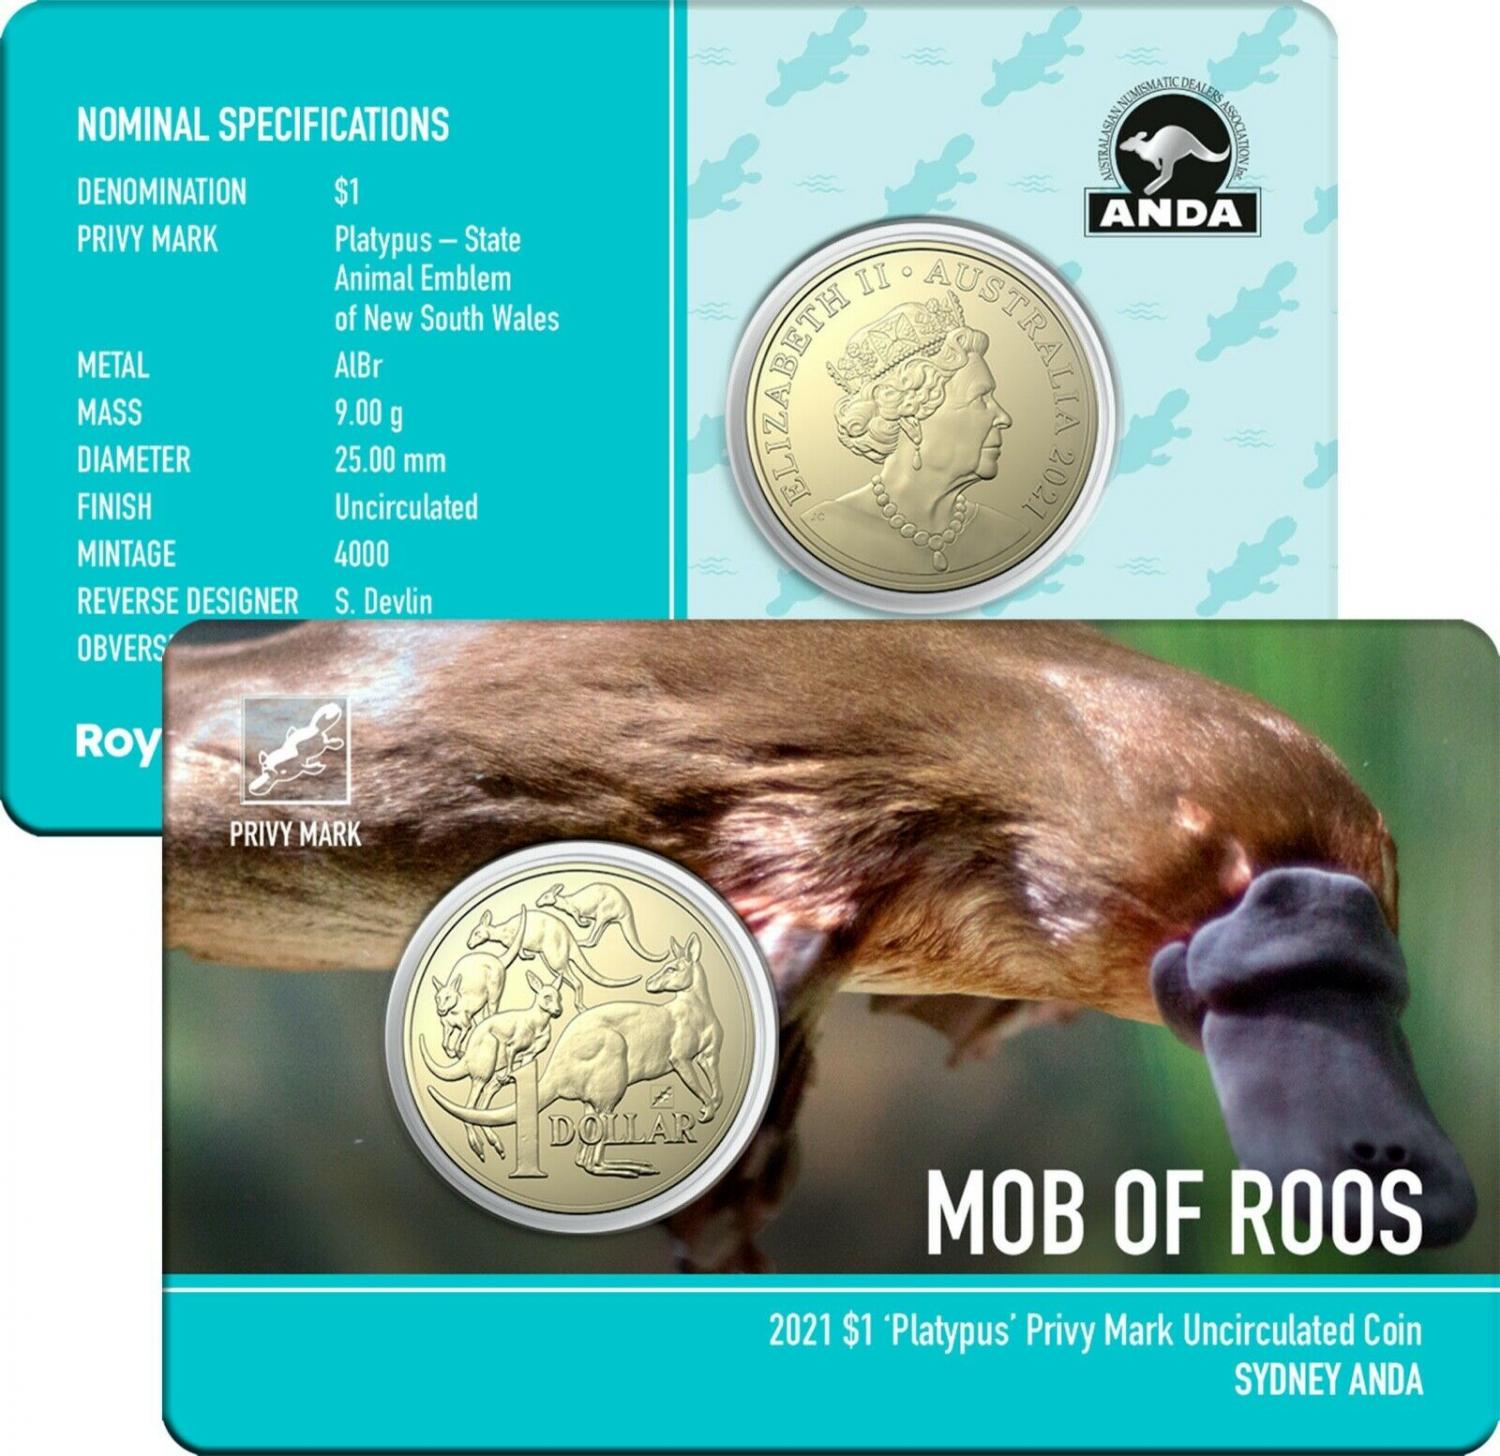 Thumbnail for 2021 Australian Mob of Roos $1 Coin - Platypus Privymark - Sydney ANDA Show